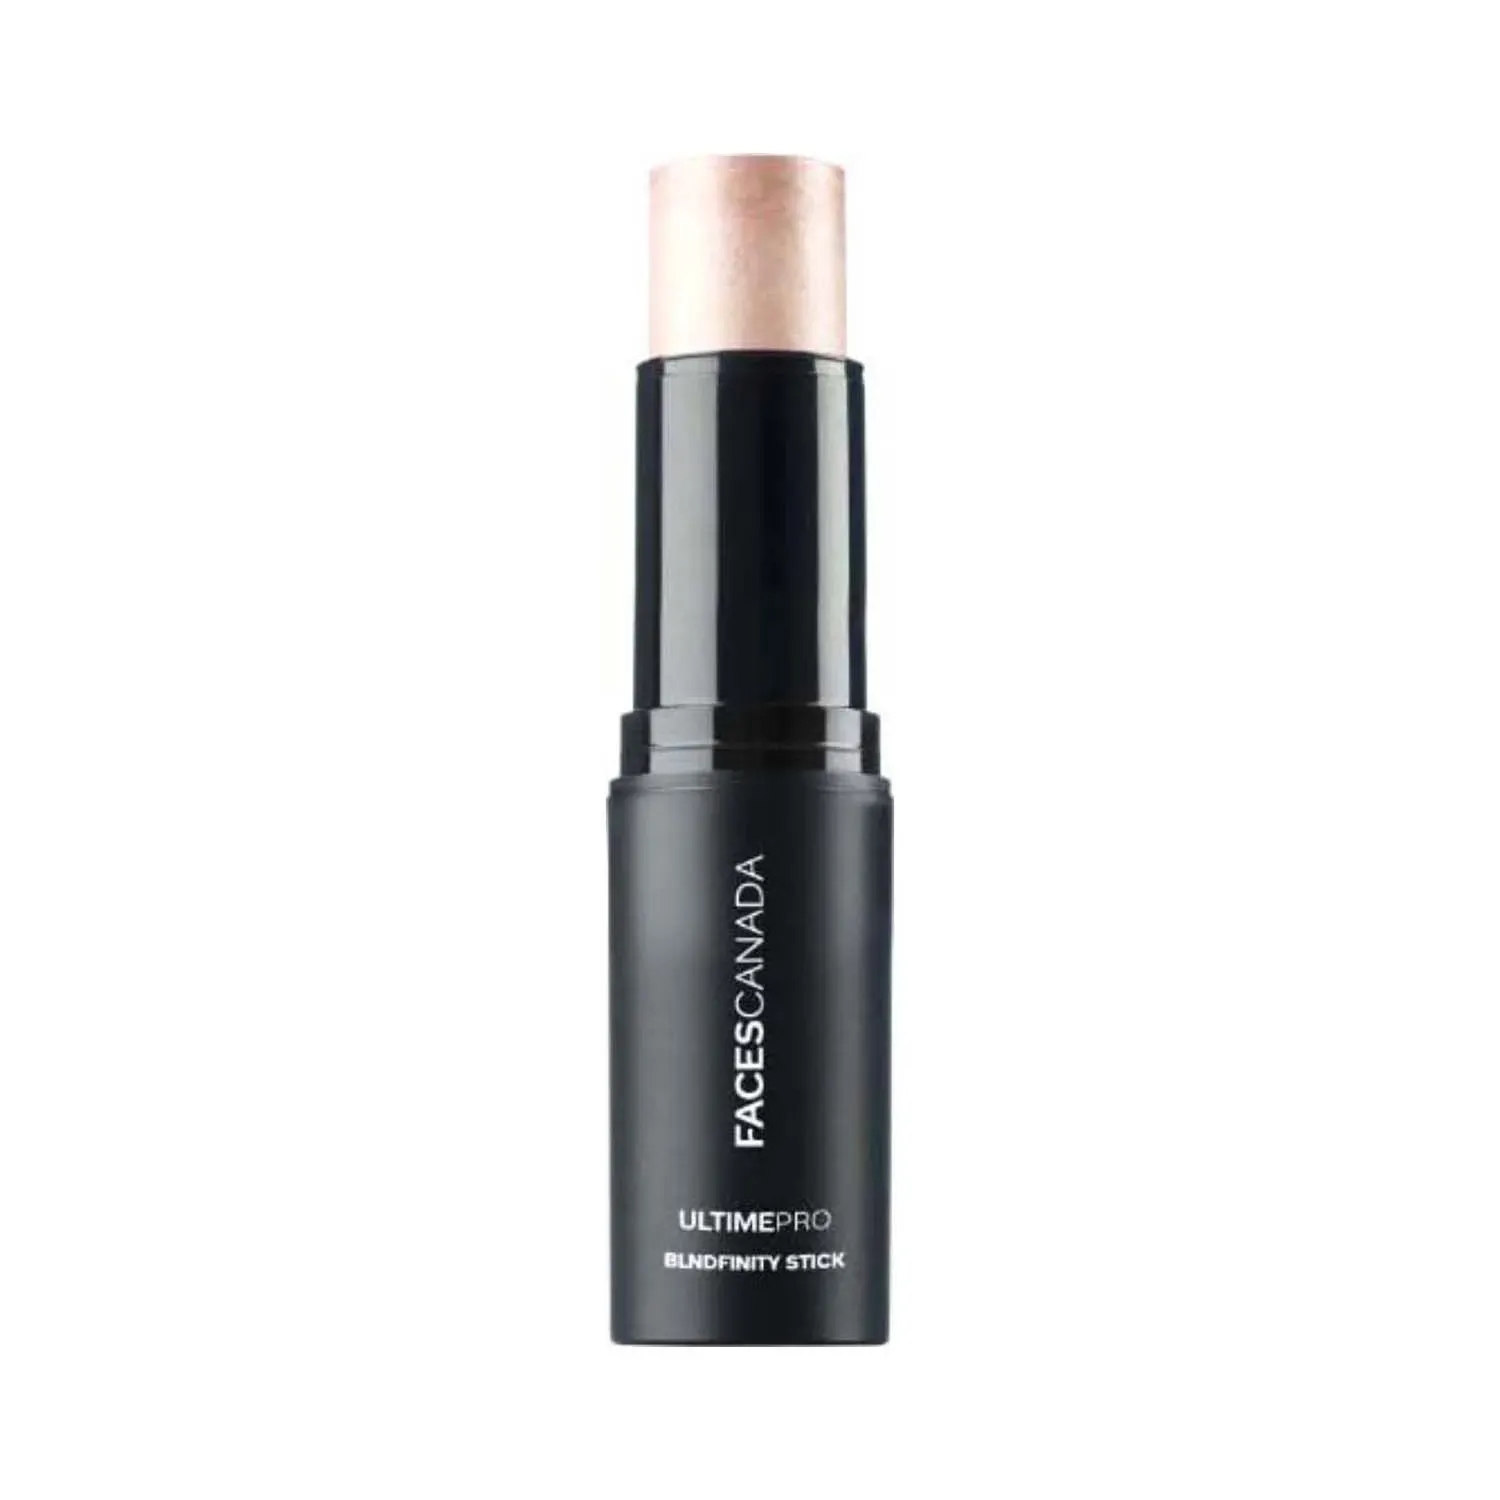 Faces Canada | Faces Canada Ultime Pro BlendFinity Stick Highlighter - 01 Make Me Shine (10g)